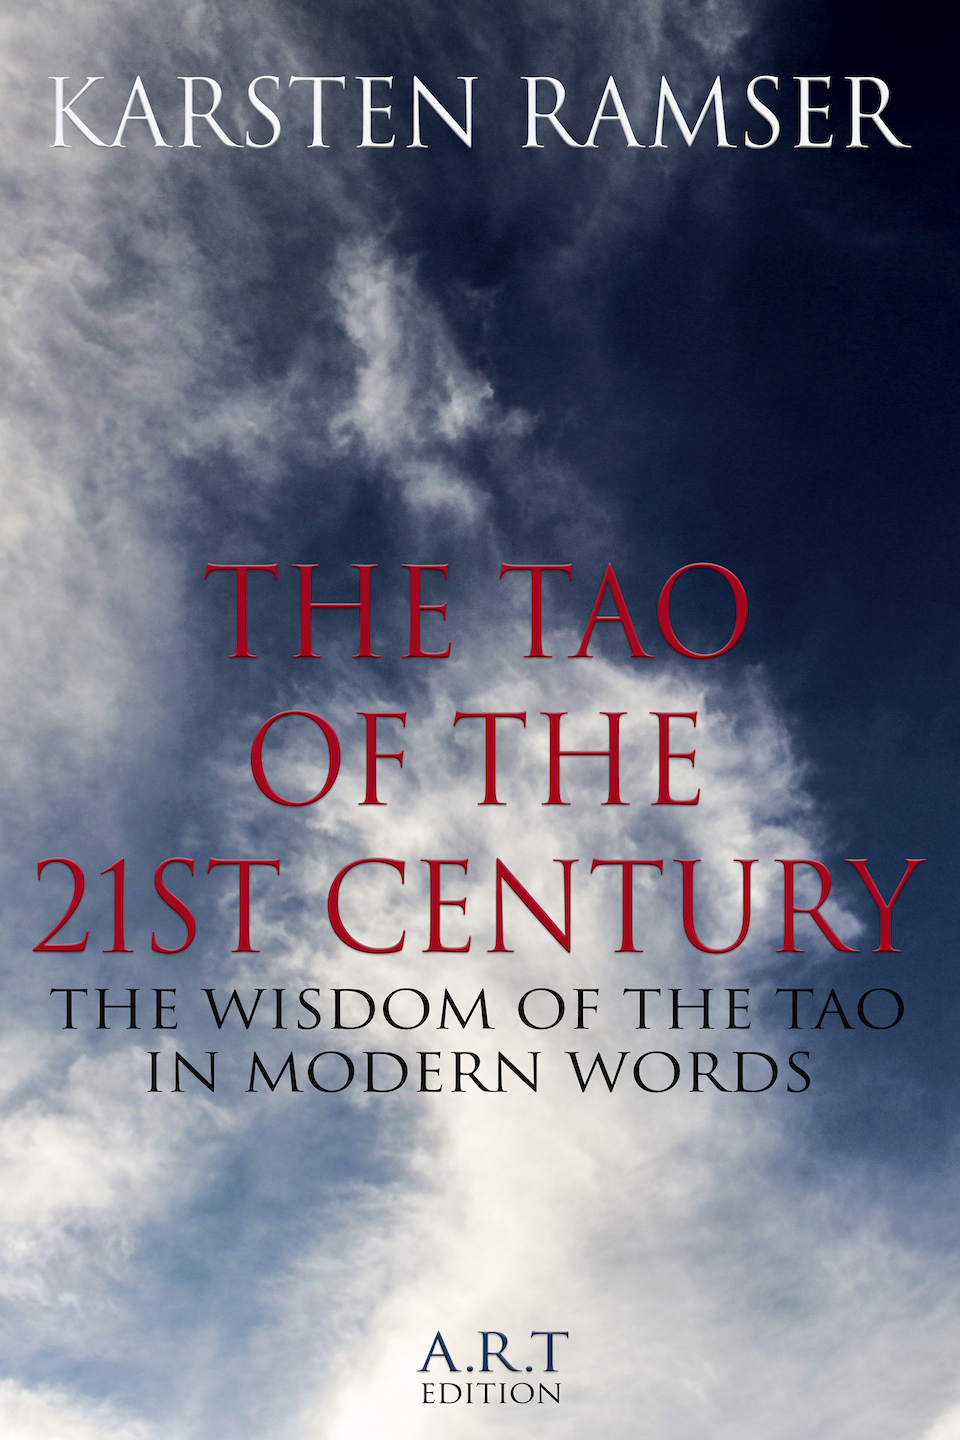 The Tao of the 21st century (eBook)